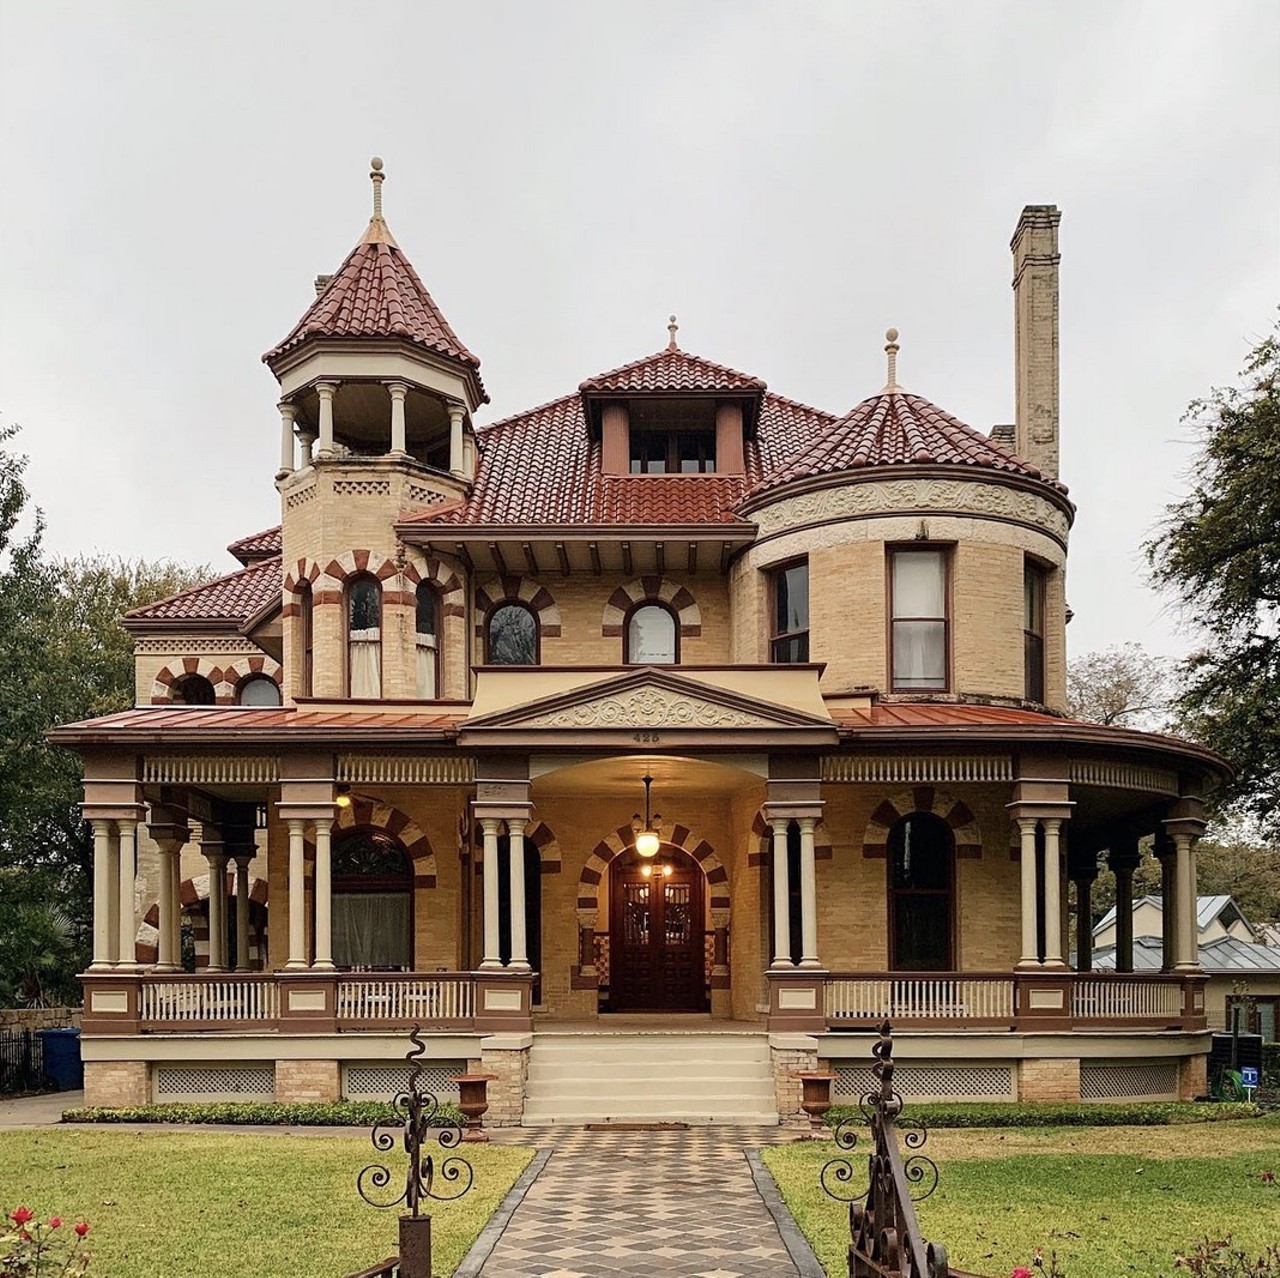 King William Historic District
Southtown
Stroll through the King William district and indulge in some eye-popping real estate. While the newer additions of the neighborhood are quirky and artsy, the long-standing homes here are seriously #homegoals. It seems like no two homes look alike, though many fit into the Greek Revival, Victorian, and Italianate styles.
Photo via Instagram / justphotowalking